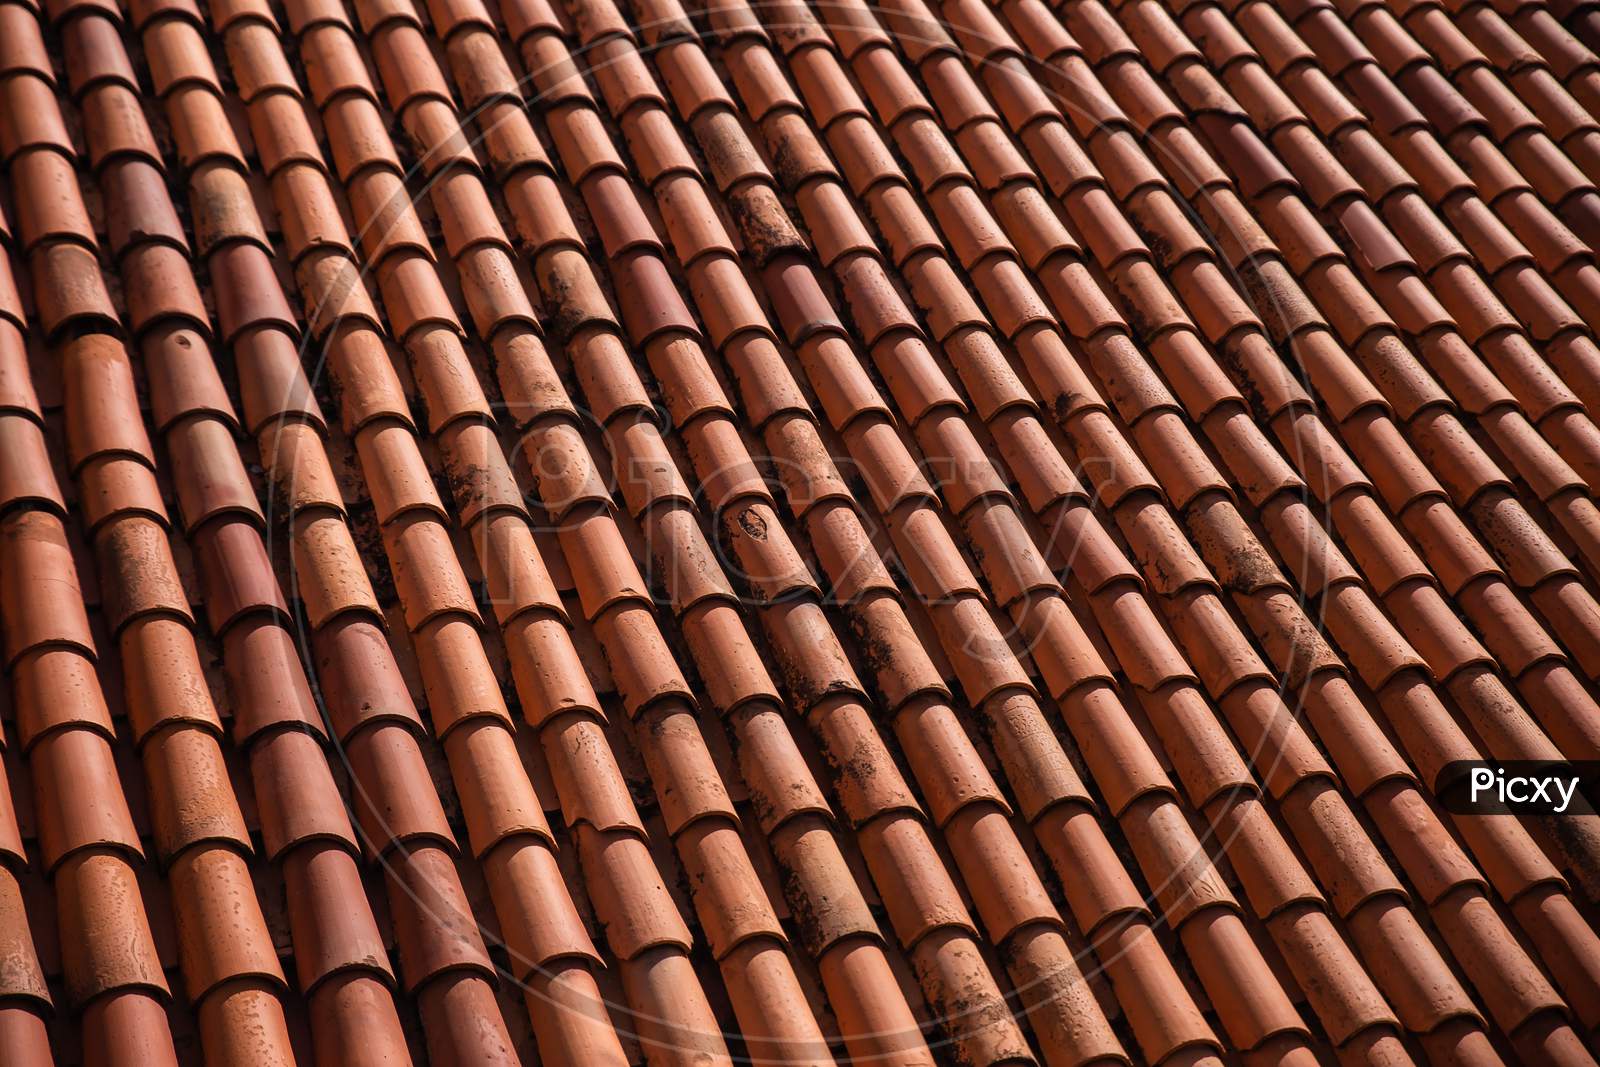 Ceramic Roof, Full Frame Shot of Roof Tiles, Roof Texture background